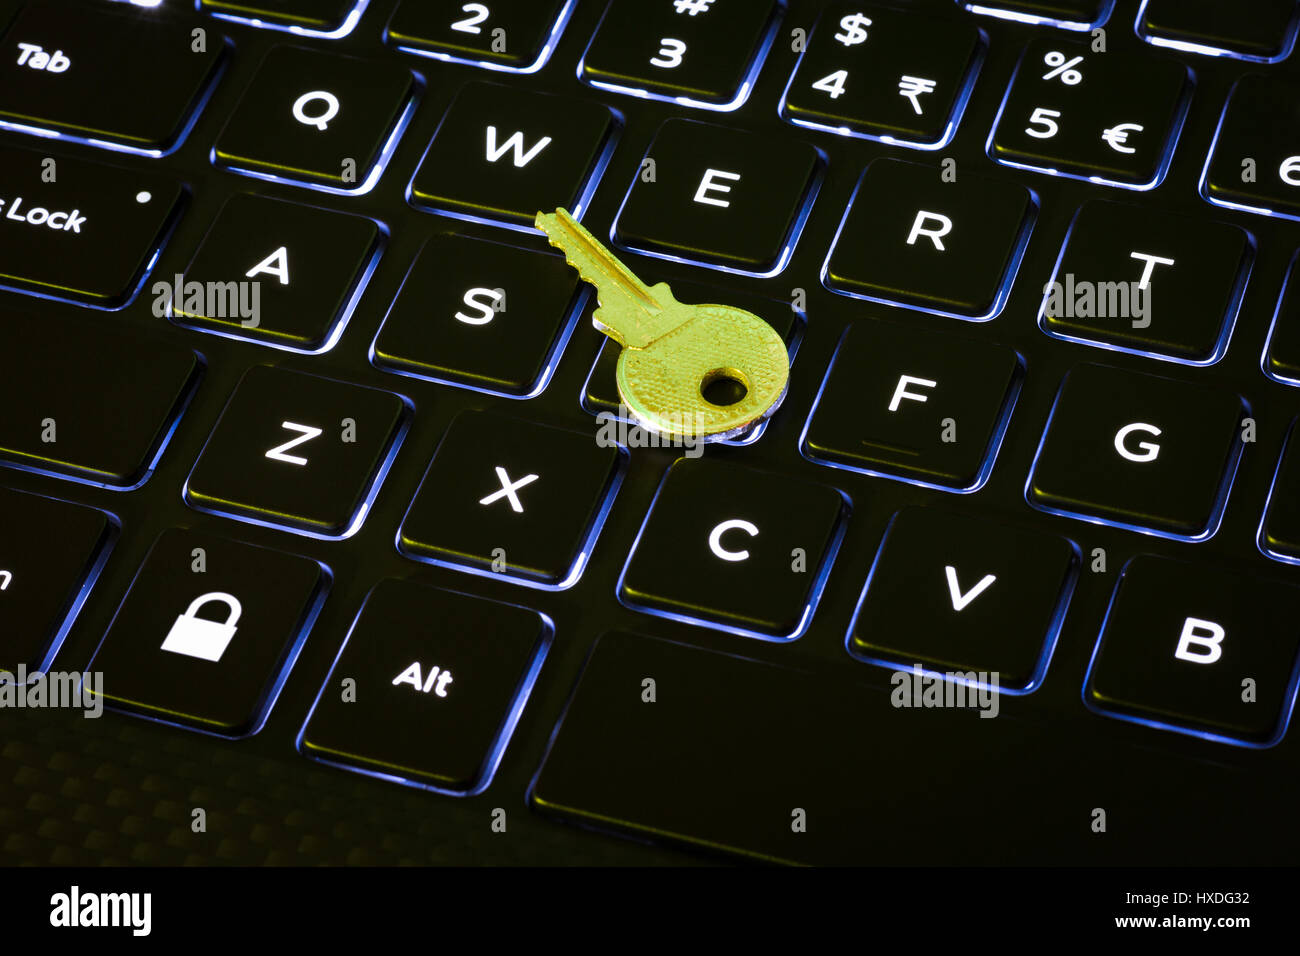 Key and lock button on a backlit computer keyboard Stock Photo